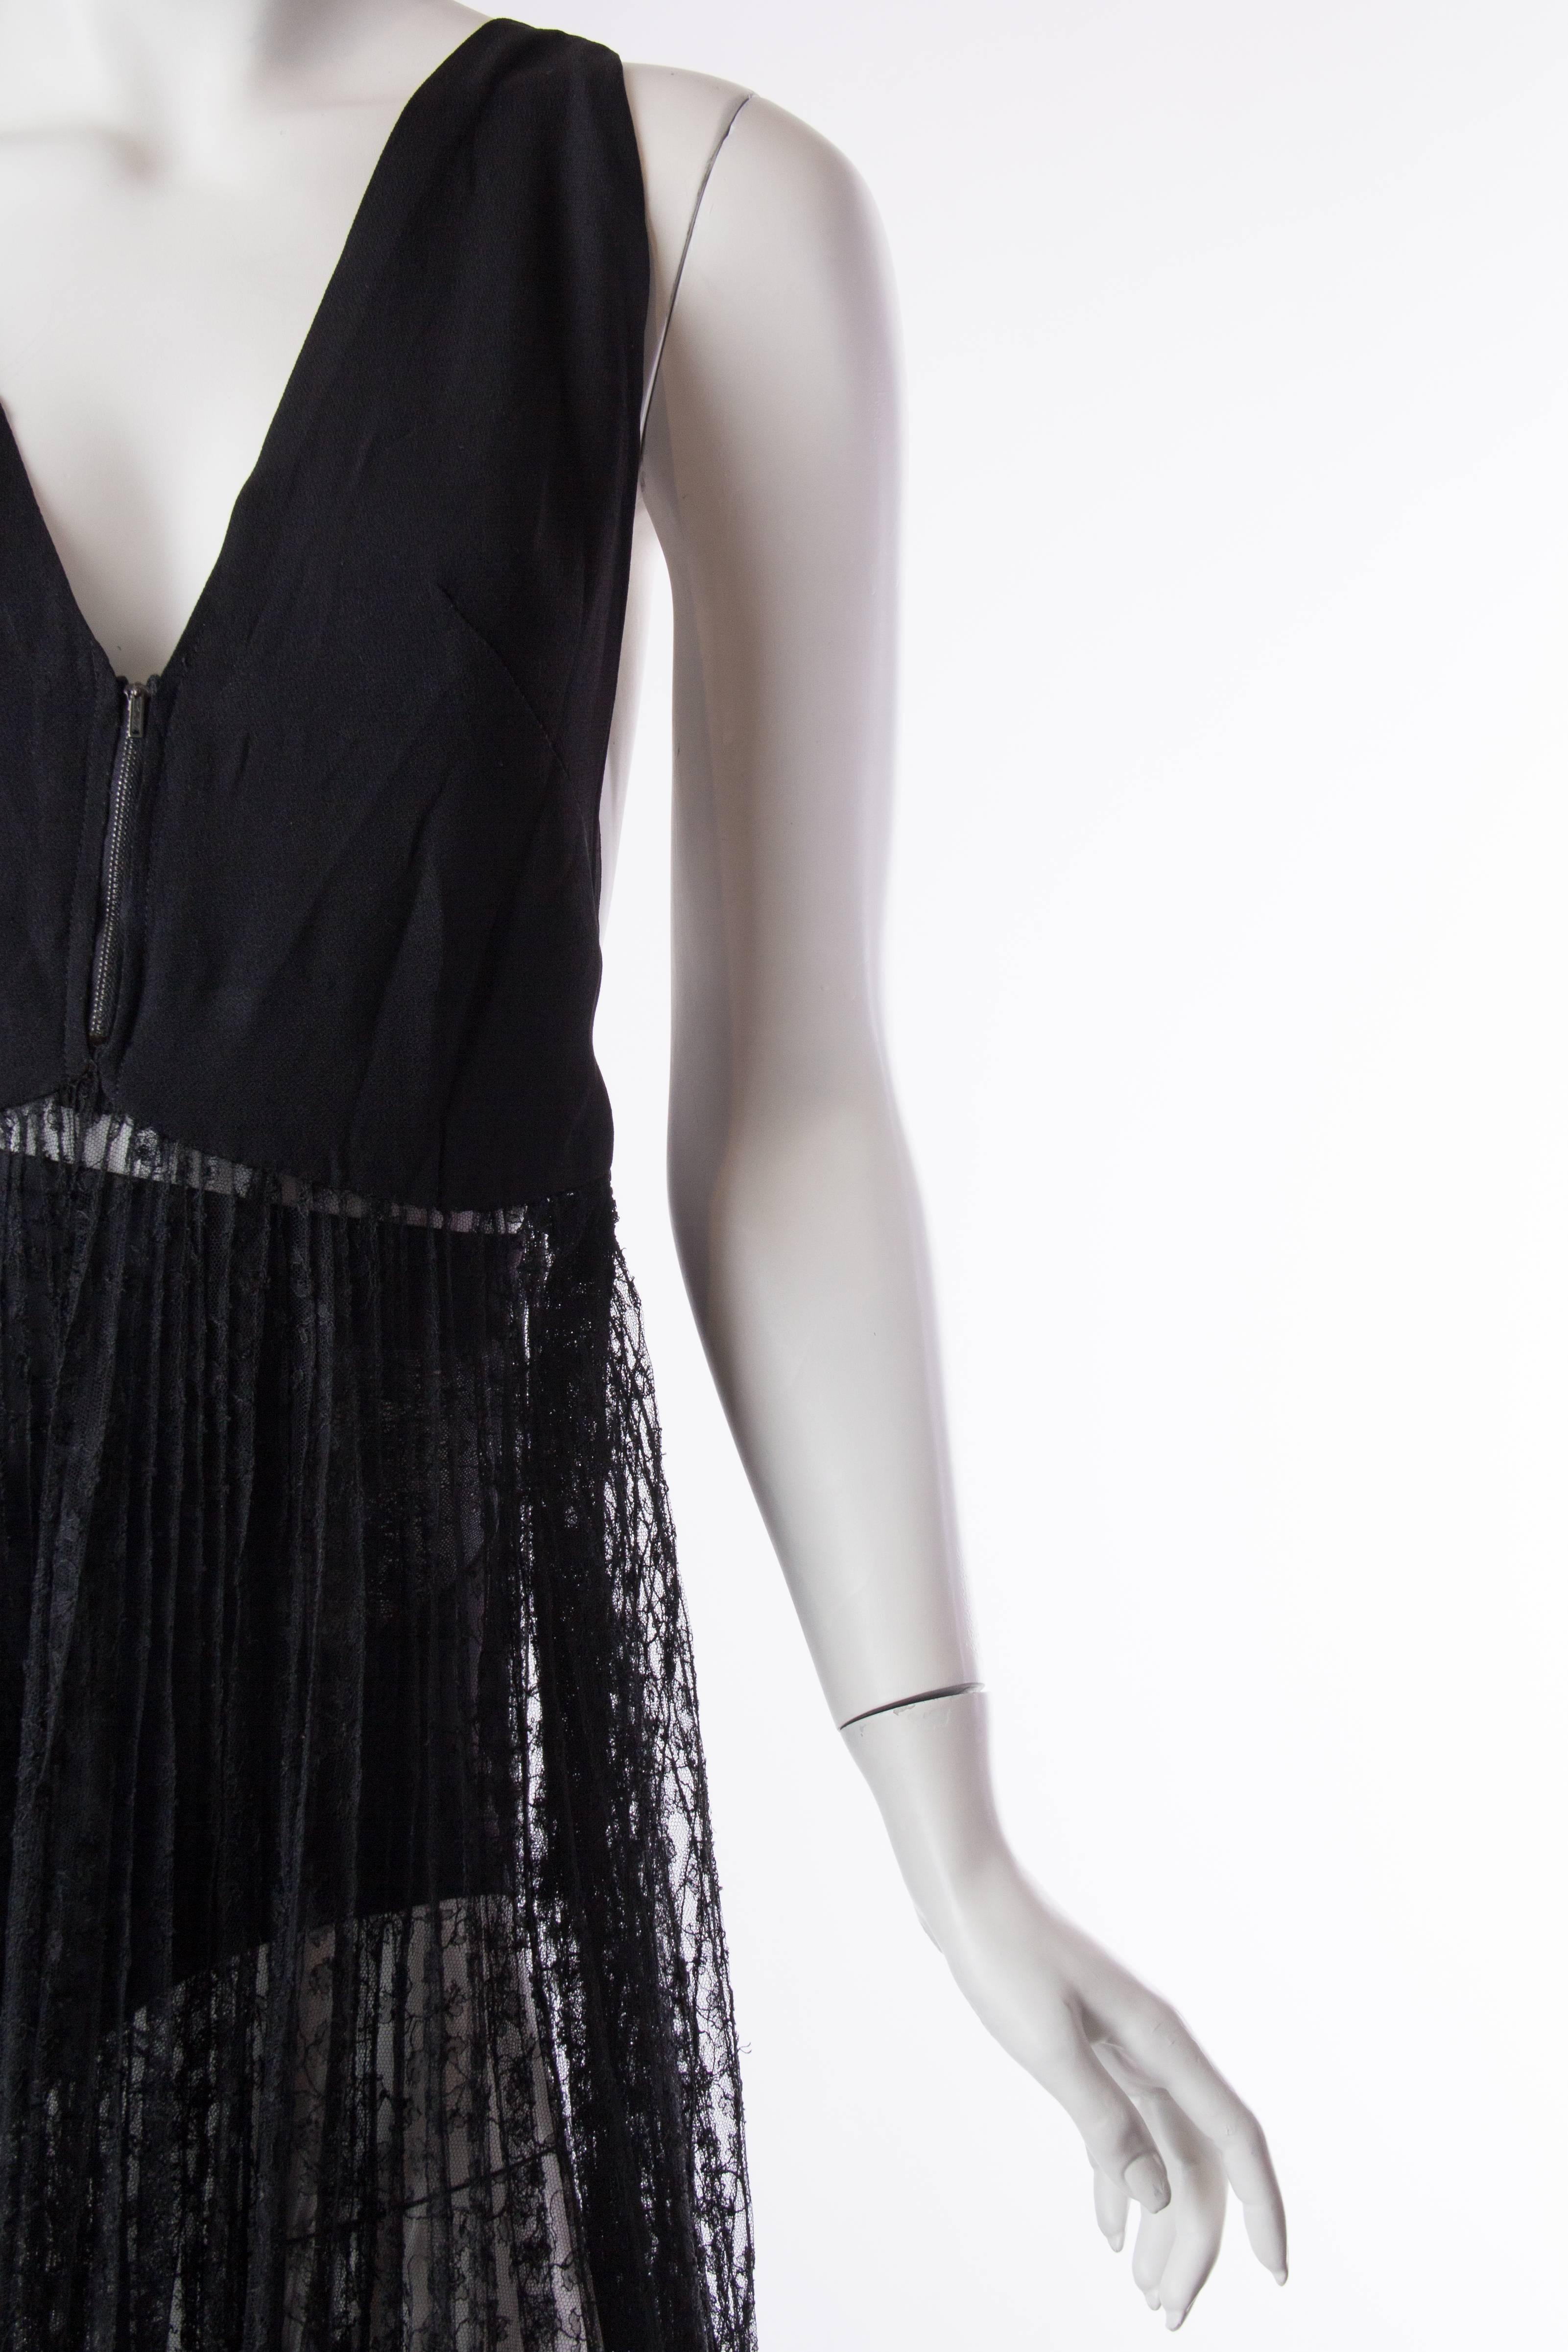 Women's Sheer vintage black lace dress with 1970s racer back lace 